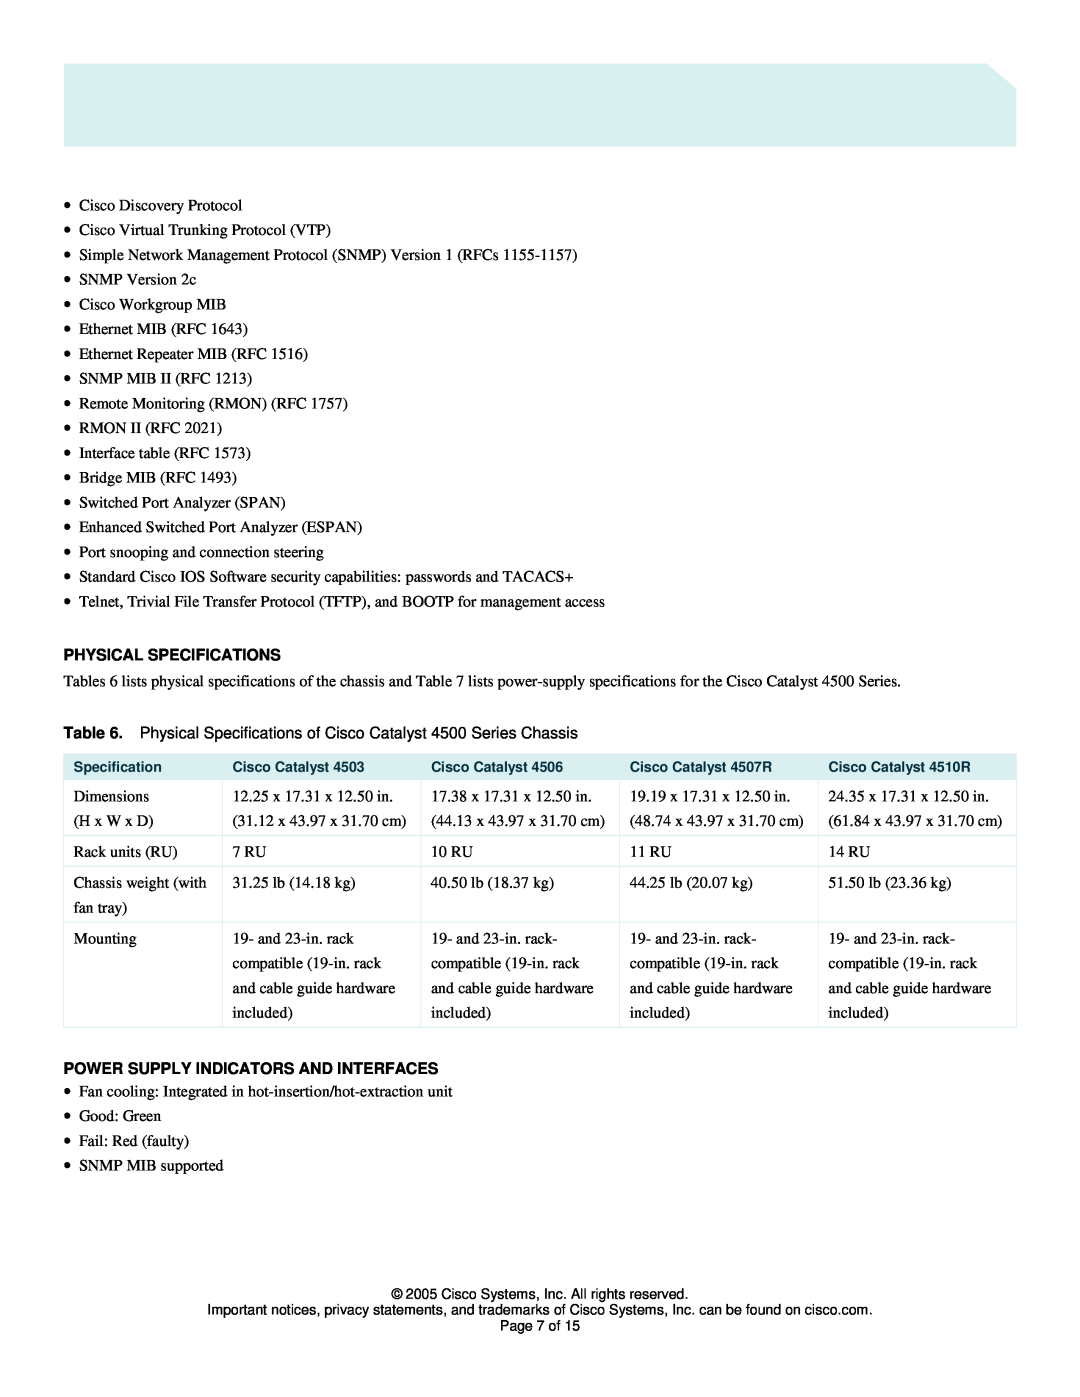 Cisco Systems 4500 manual Physical Specifications, Power Supply Indicators And Interfaces 